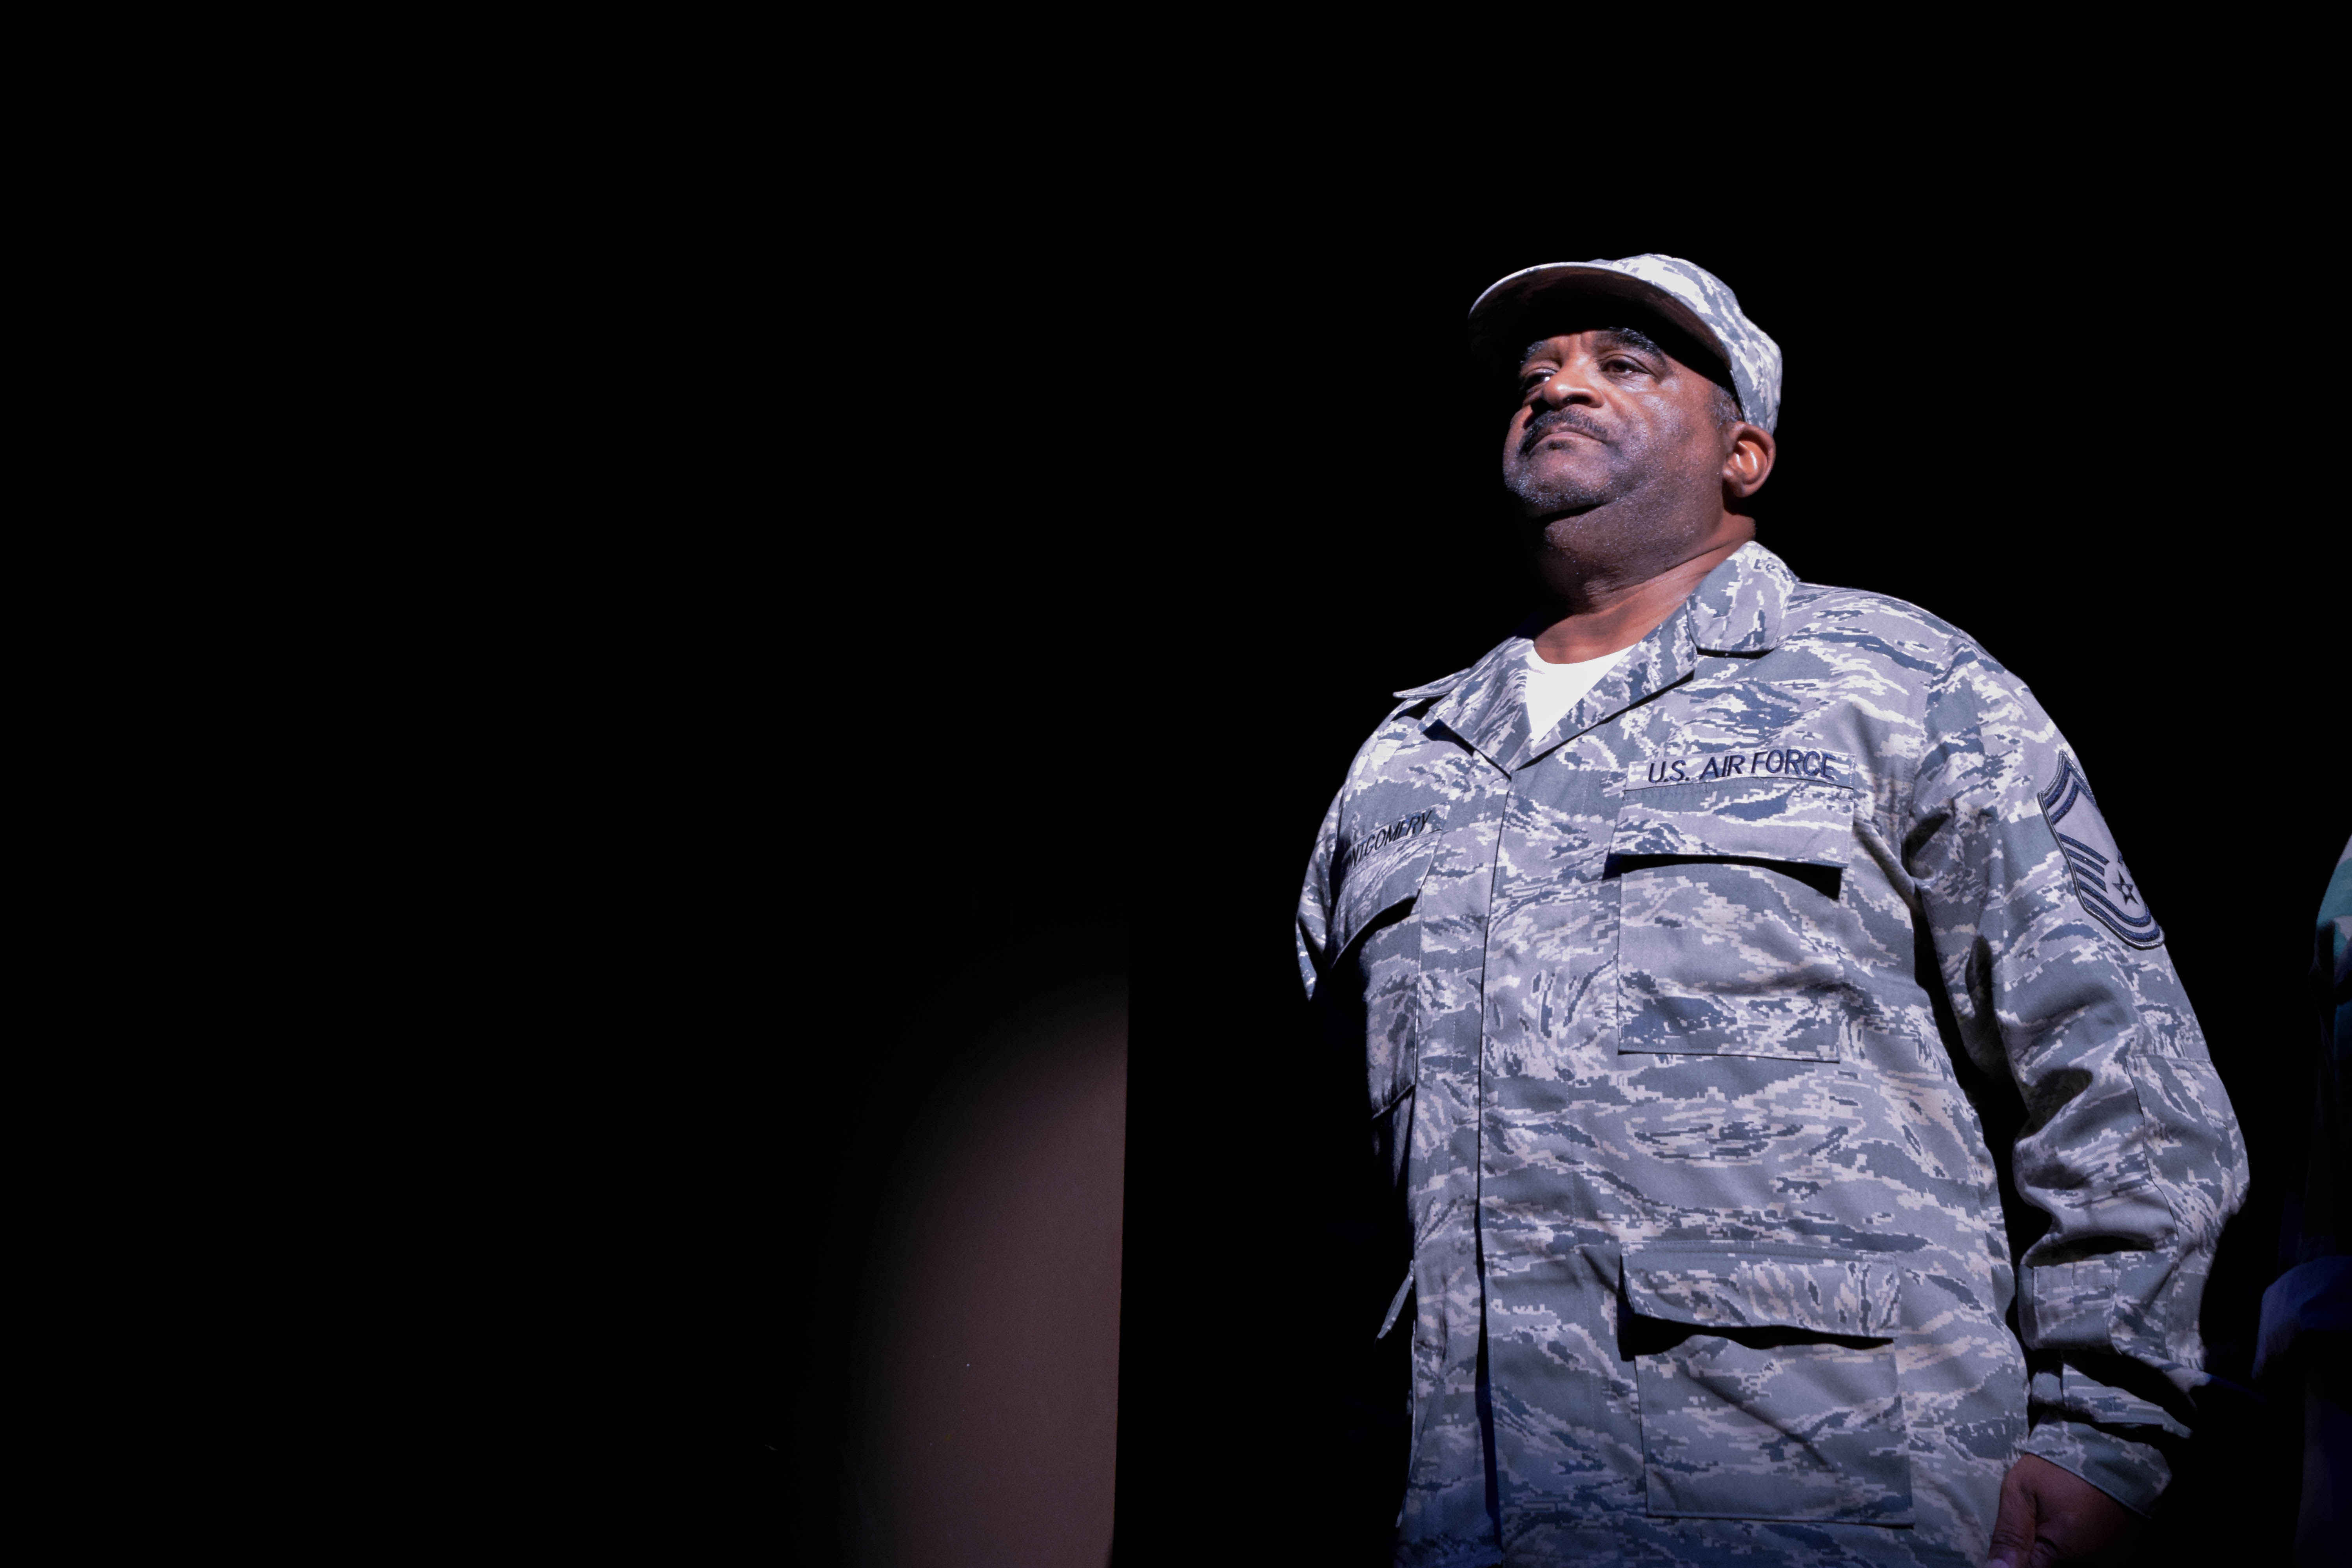 Monty Montgomery in a performance of Marching On at The Wallis.  PHOTO CREDIT: Nate Albus